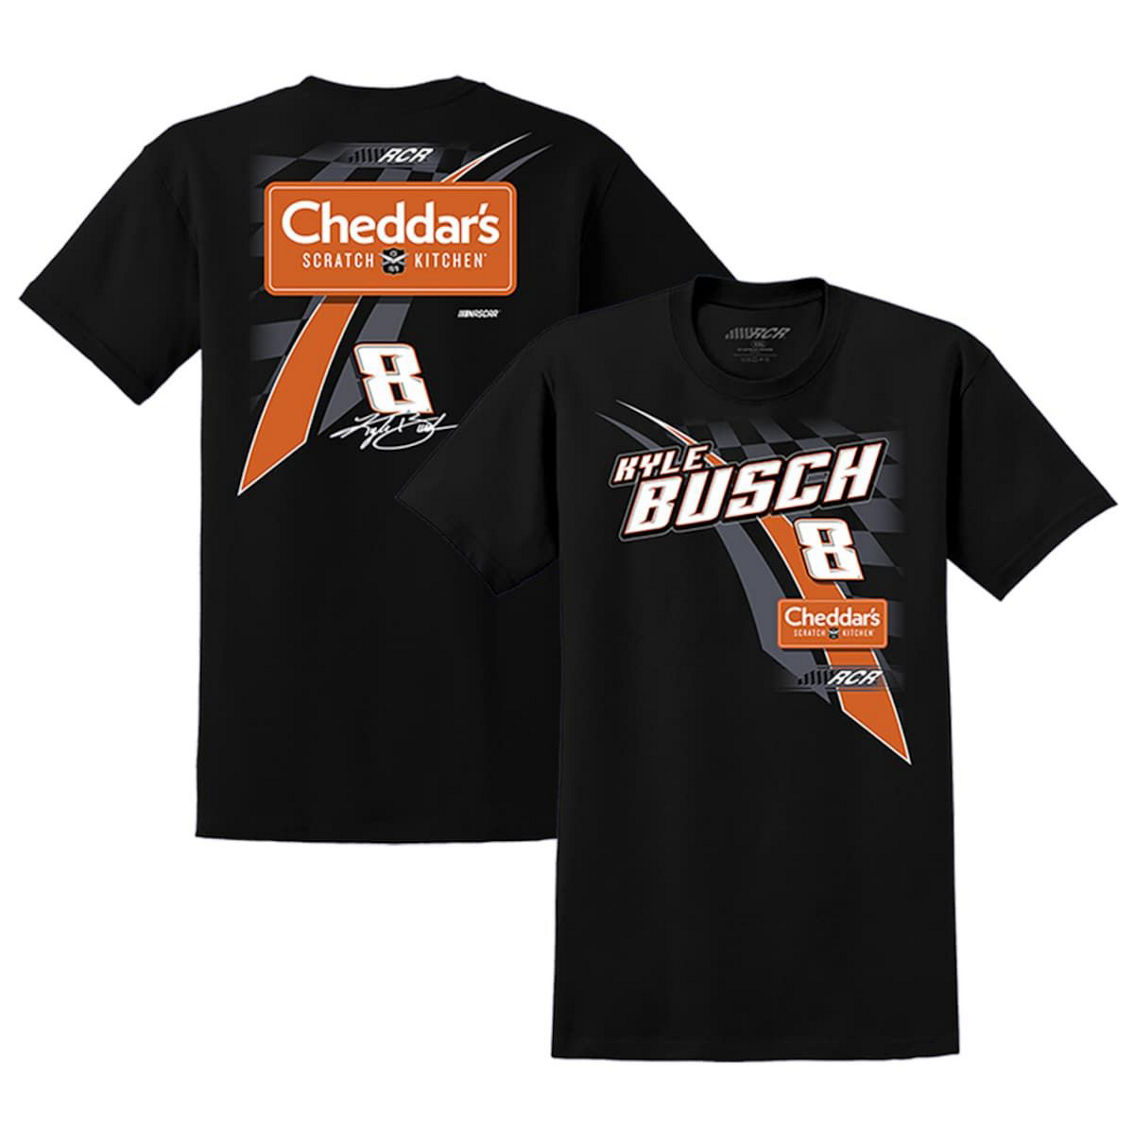 Richard Childress Racing Team Collection Men's Richard Childress Racing Team Collection Black Kyle Busch Cheddar's Lifestyle T-Shirt - Image 2 of 4